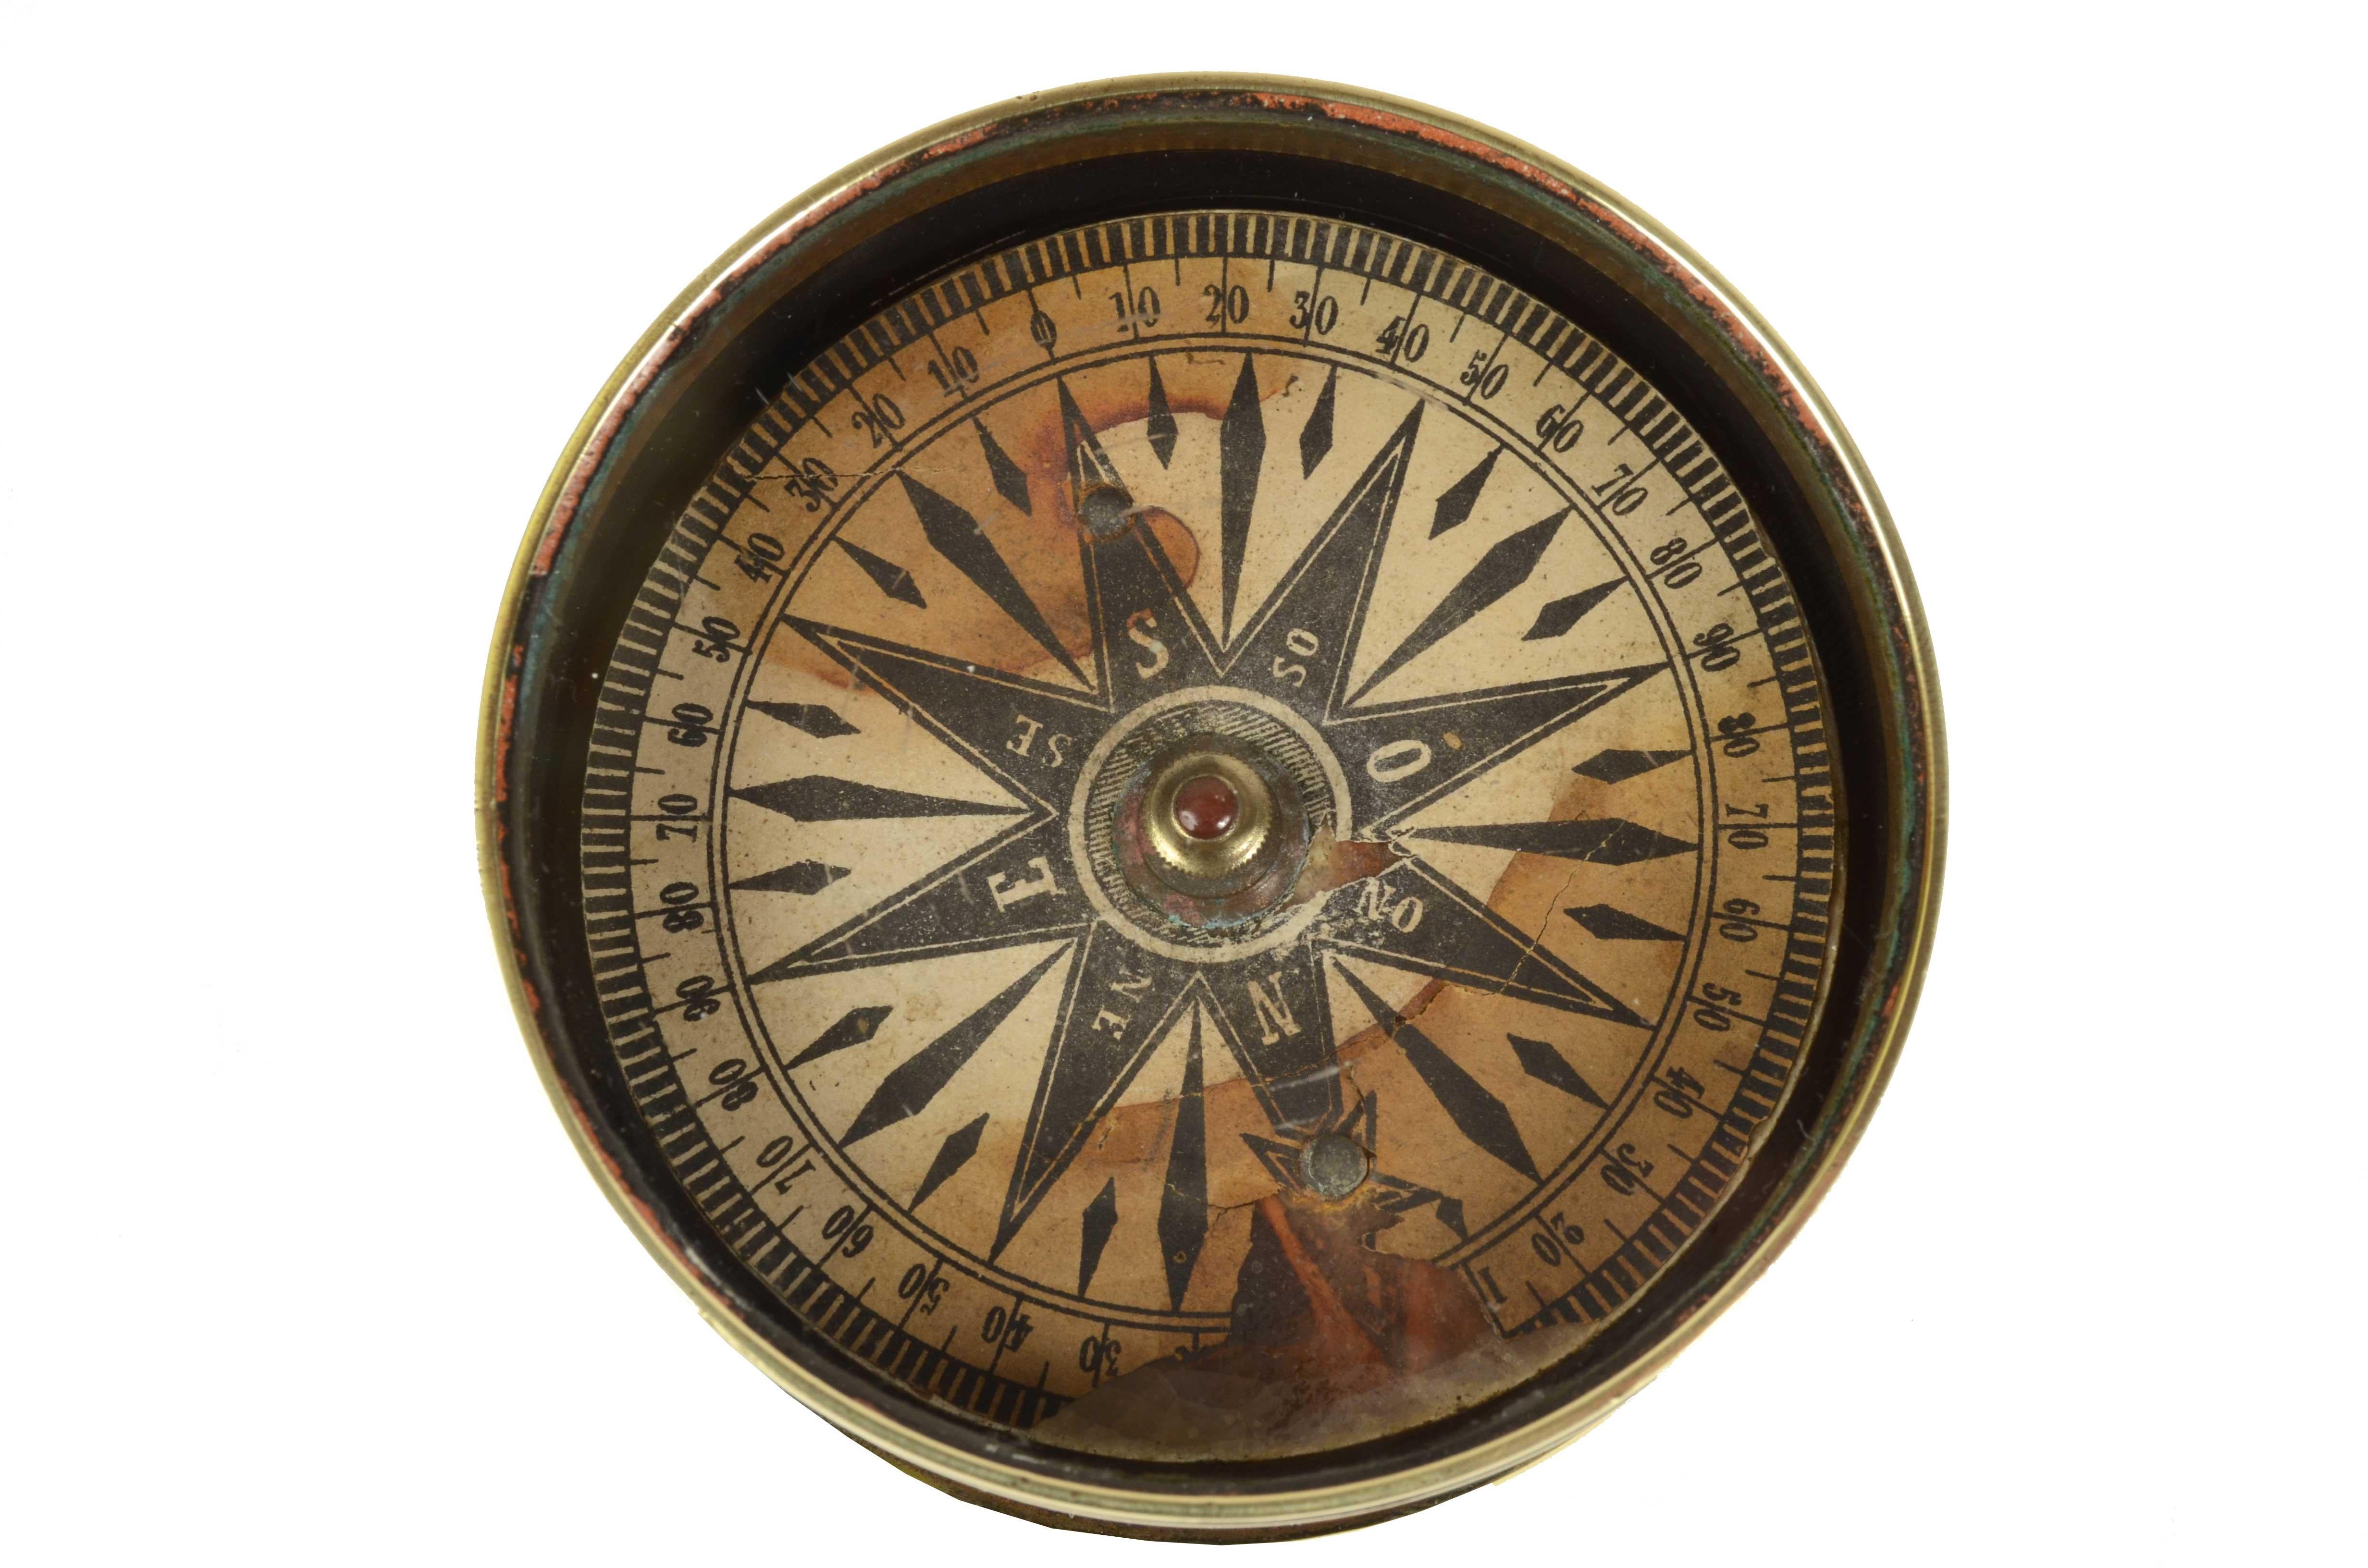 Dry little compass placed in its original turned brass box with a protection glass. English manufacture of the second half of XIX century. Compass card printed by engraving on copper plate. Good condition, shortcomings in the wind rose,
Fully